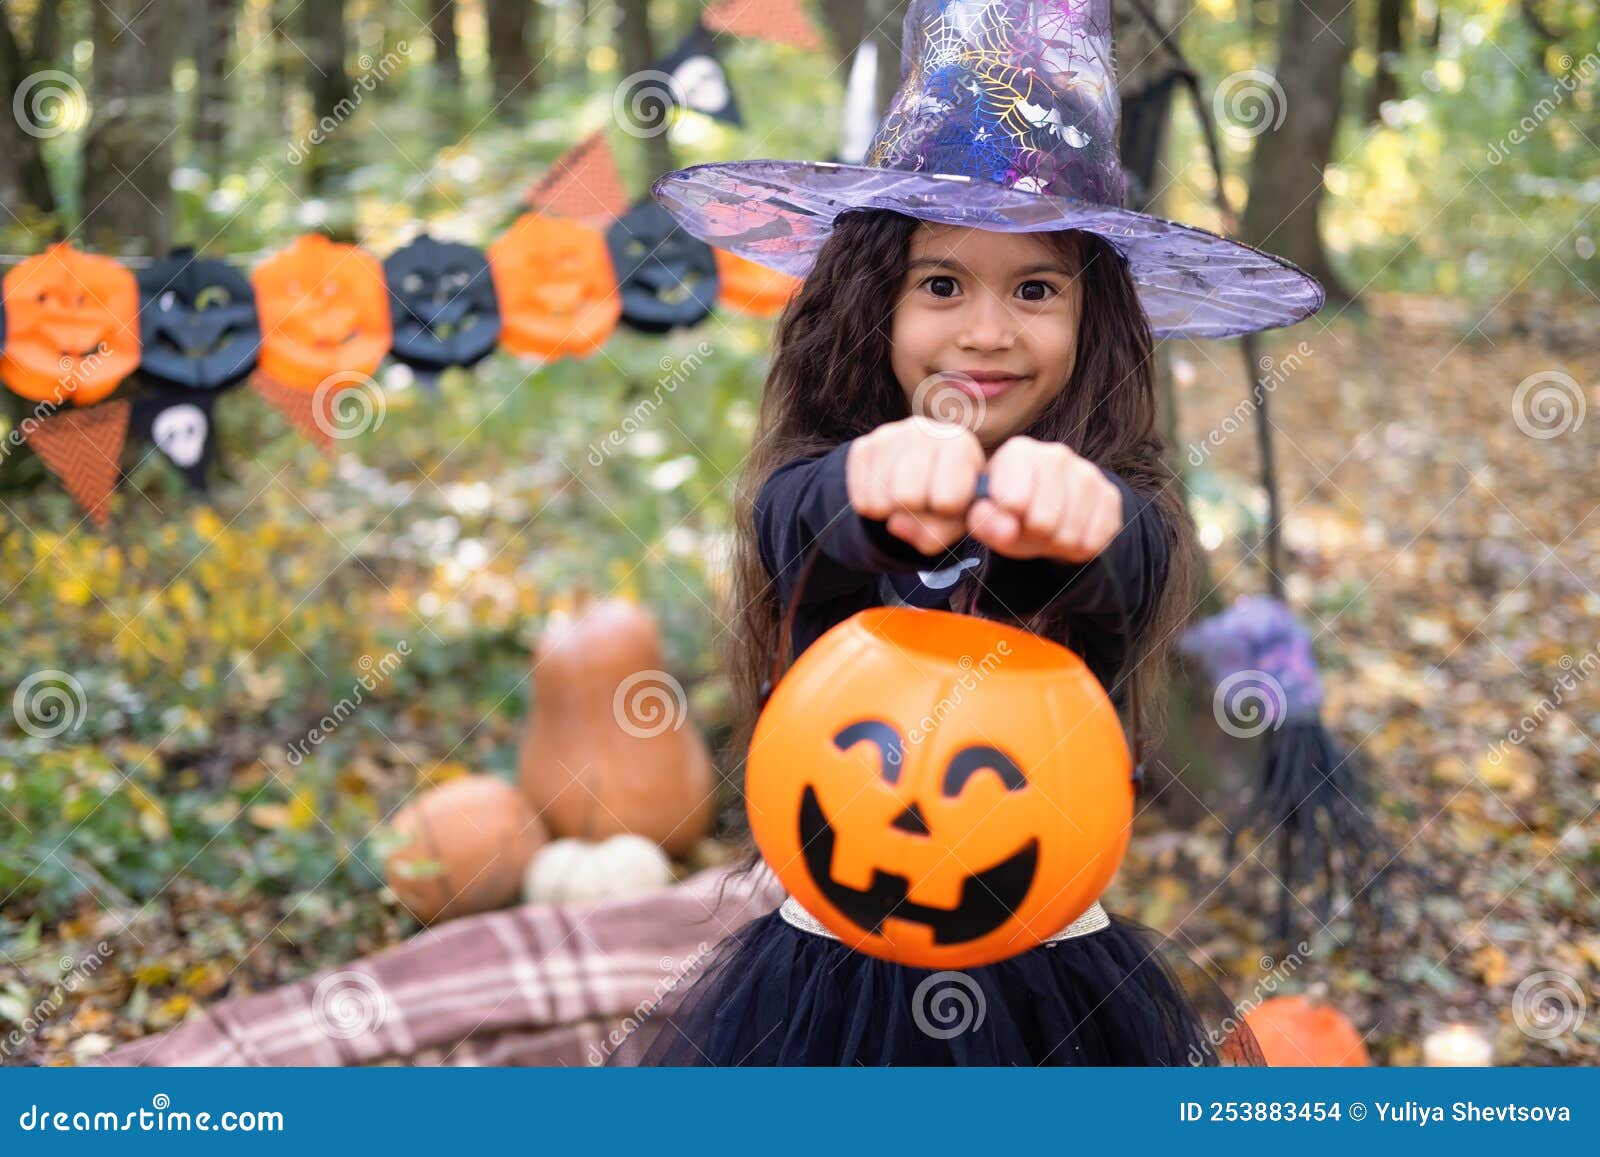 Halloween. Cute Arab Girl in Witch Costume with Jack O Lantern Outdoor ...